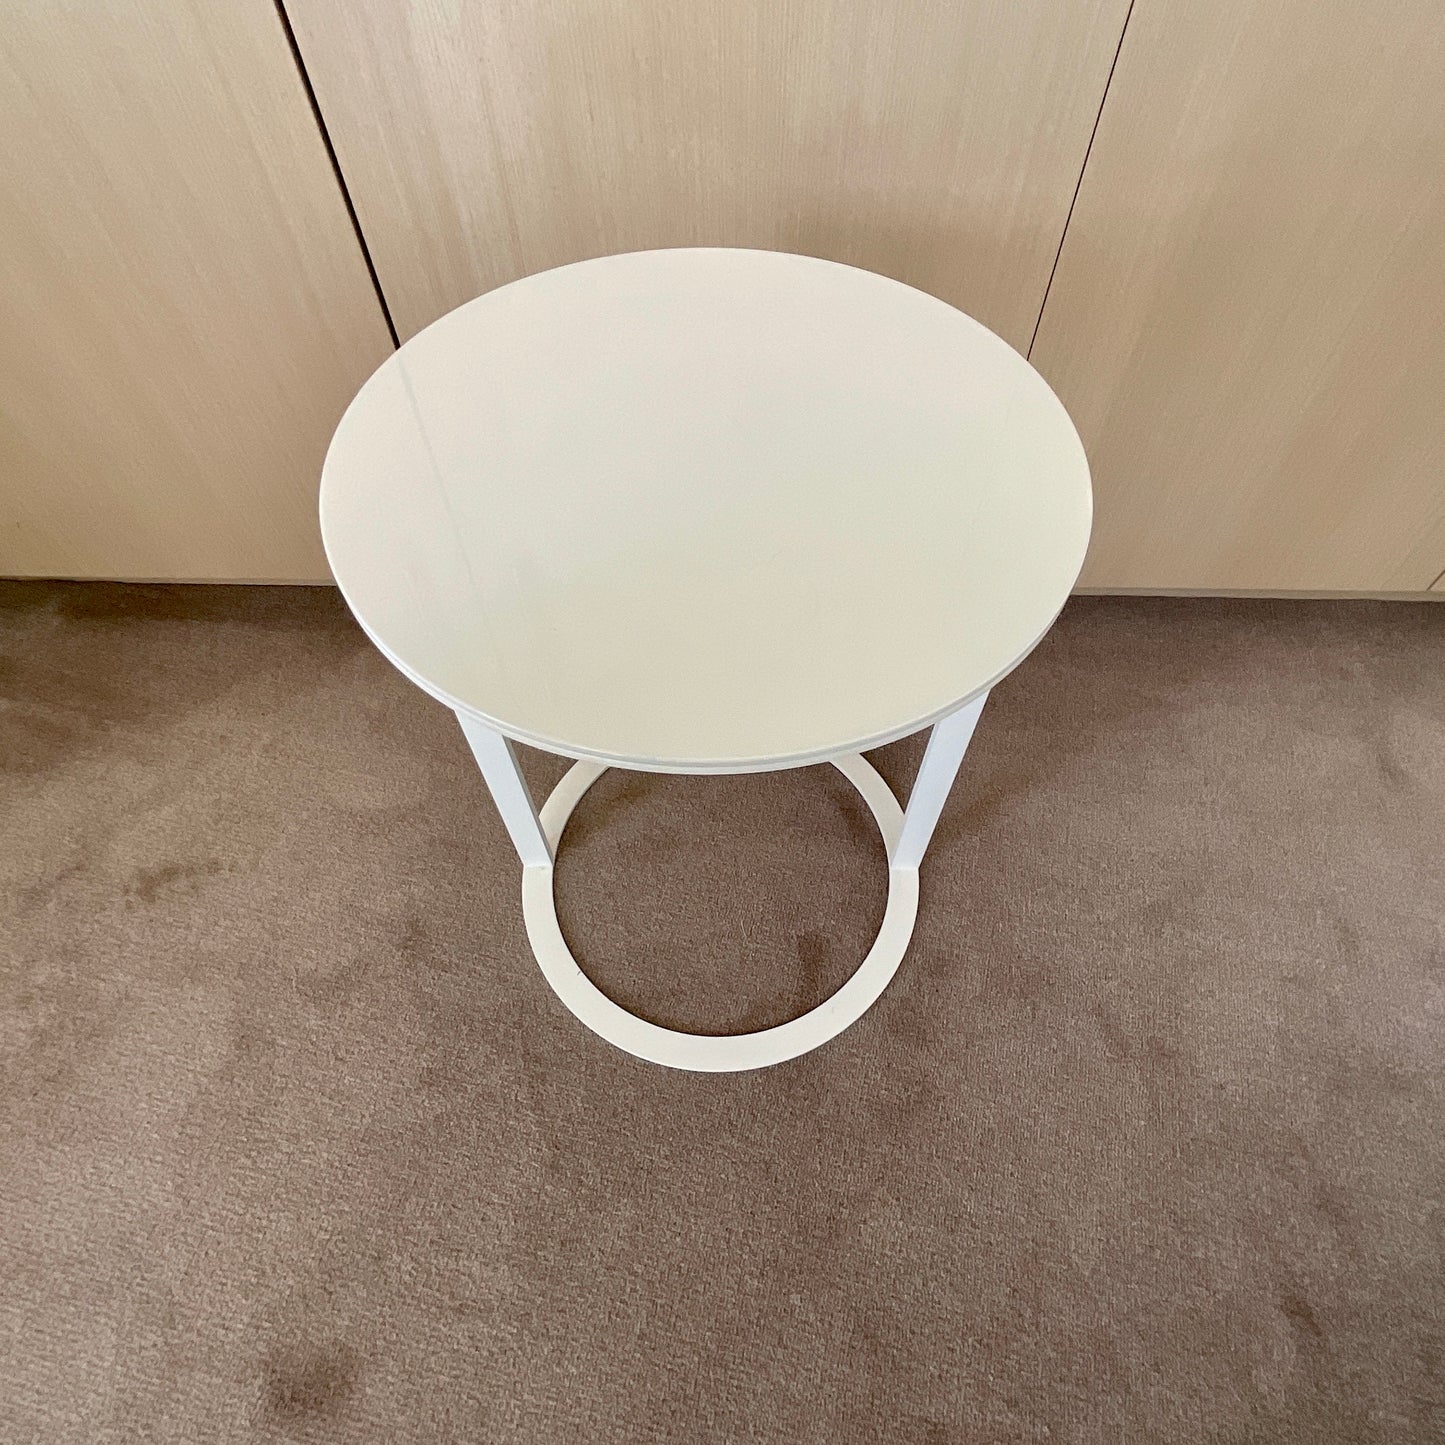 Frank Small Table by Antonio Citterio for B&B Italia (2 available)